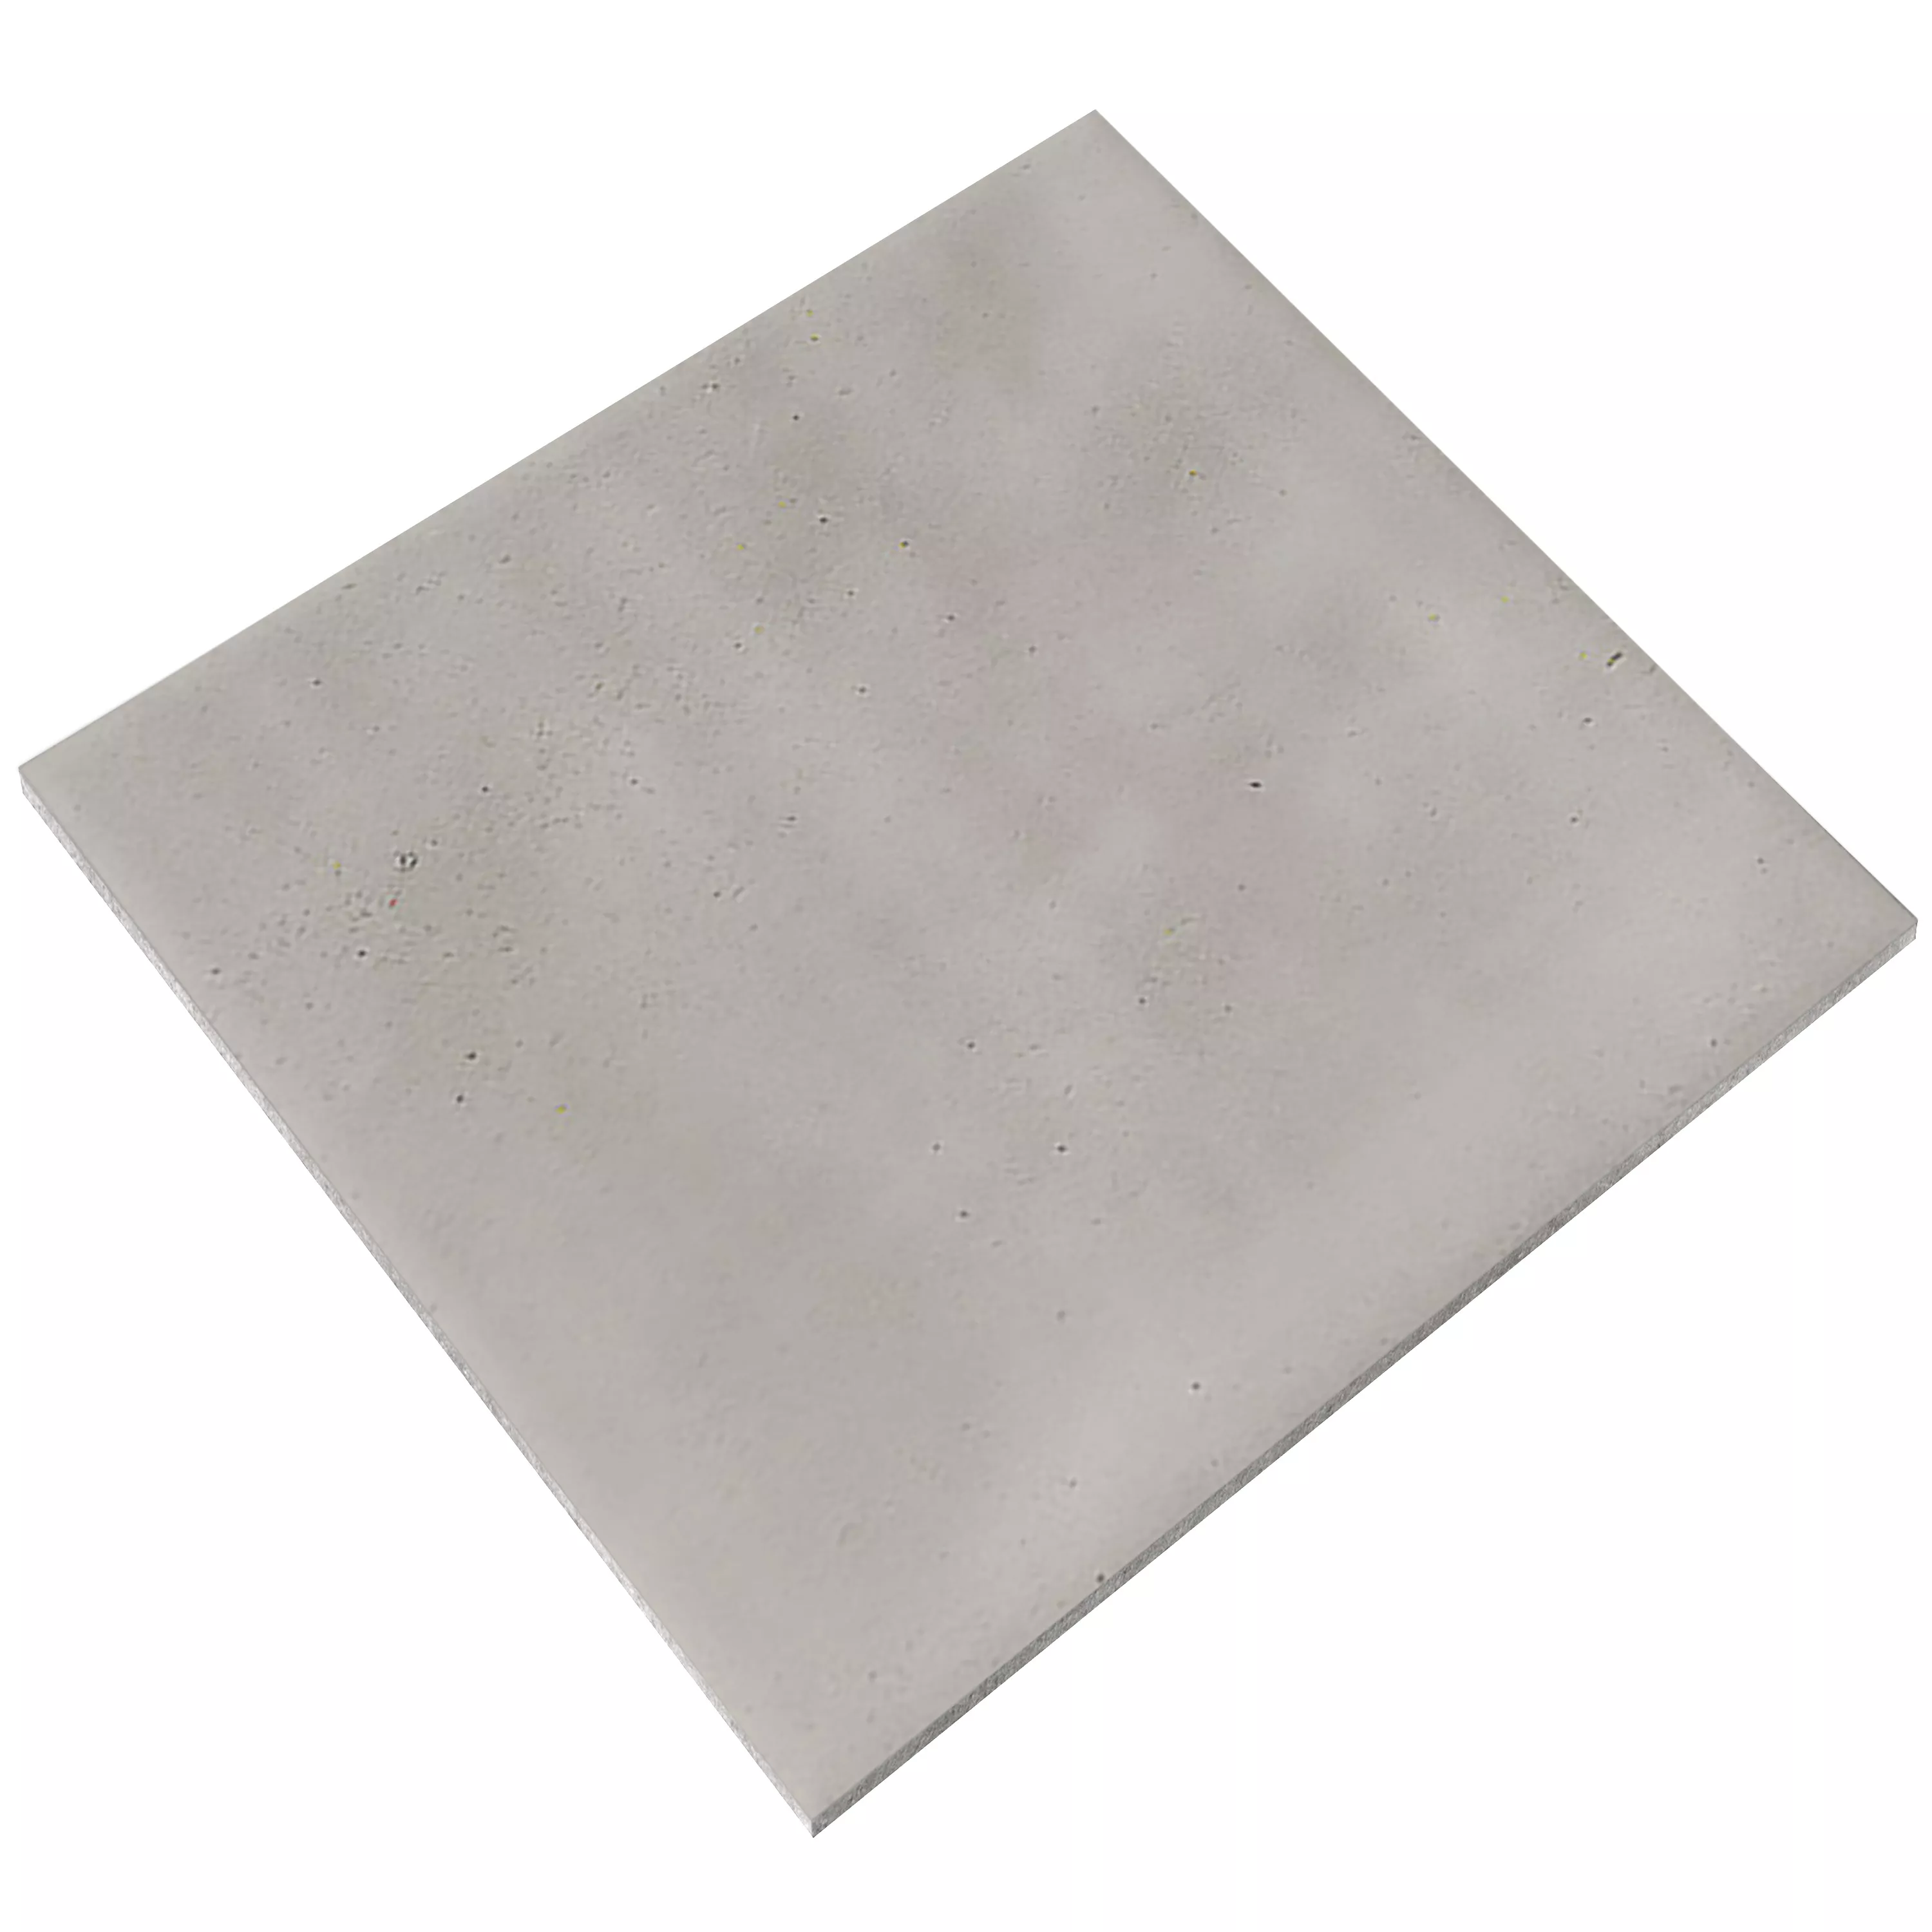 Sample Wall Tile Cap Town Glossy Waved 10x10cm Grey